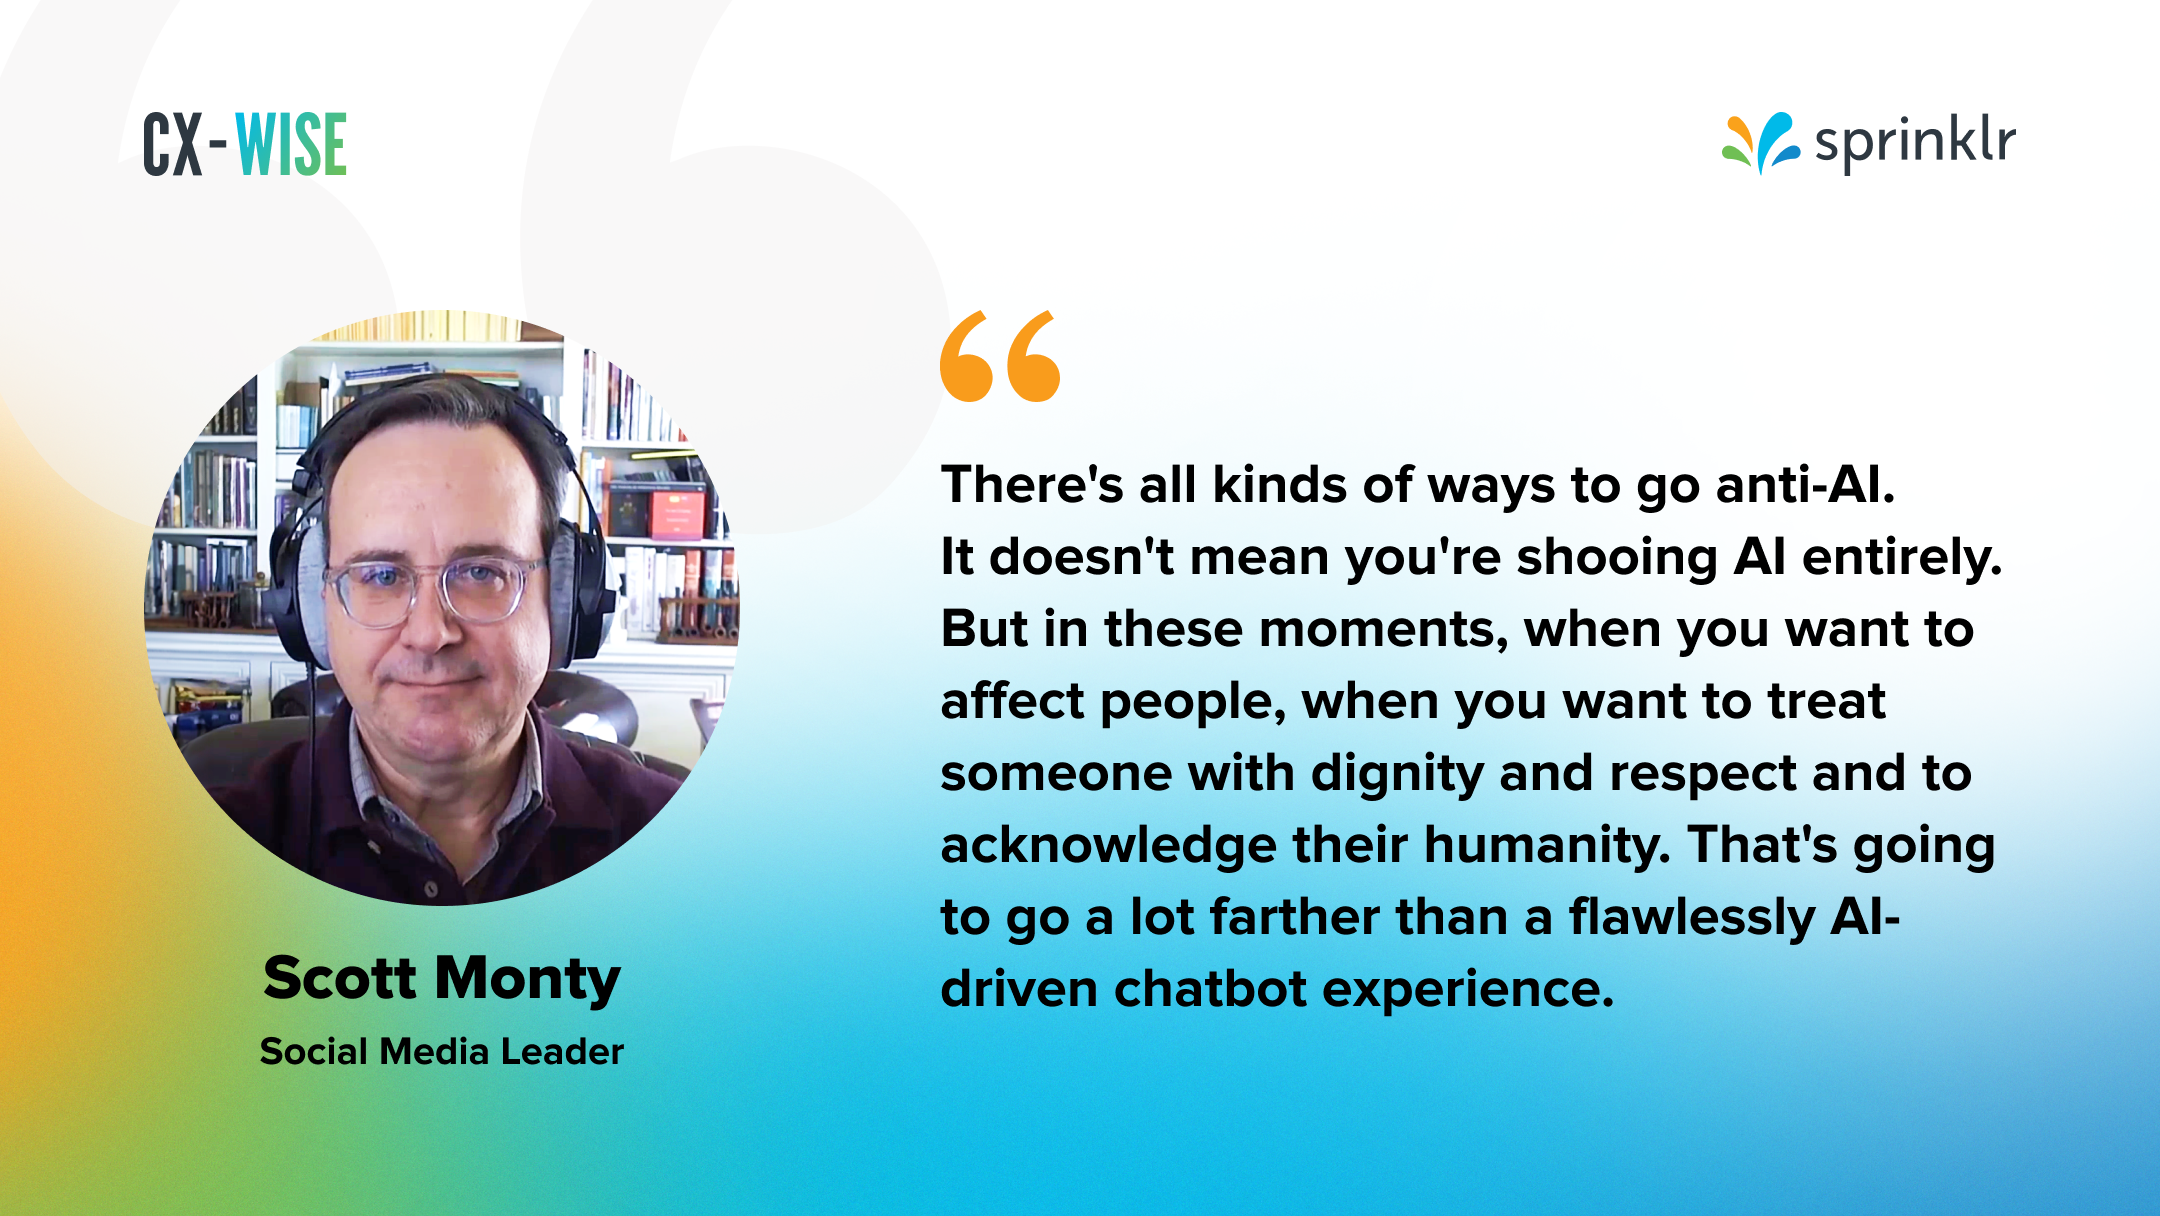 Quote from scott monty on the importance of humanizing CX